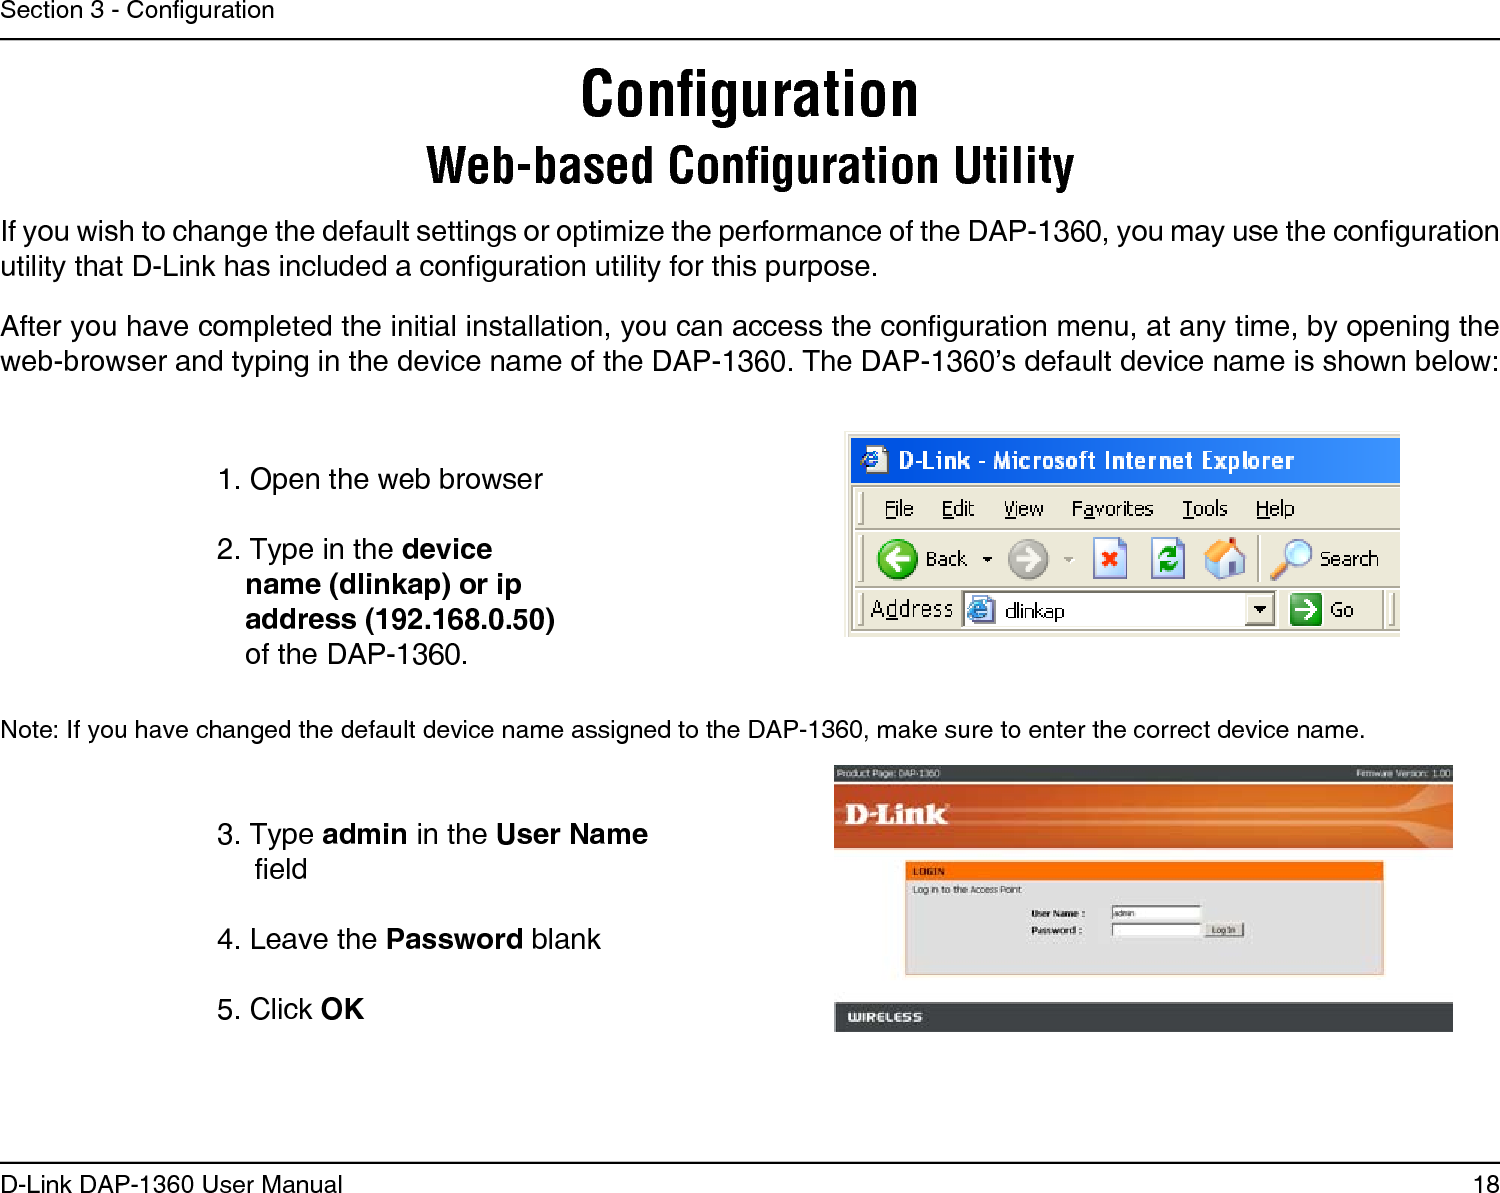 18D-Link DAP-1360 User ManualSection 3 - CongurationConﬁgurationWeb-based Conﬁguration Utility1. Open the web browser2. Type in the device name (dlinkap) or ip address (192.168.0.50) of the DAP-1360.If you wish to change the default settings or optimize the performance of the DAP-1360, you may use the configuration utility that D-Link has included a configuration utility for this purpose.After you have completed the initial installation, you can access the configuration menu, at any time, by opening the web-browser and typing in the device name of the DAP-1360. The DAP-1360’s default device name is shown below:Note: If you have changed the default device name assigned to the DAP-1360, make sure to enter the correct device name. 3. Type admin in the User Name eld 4. Leave the Password blank5. Click OK